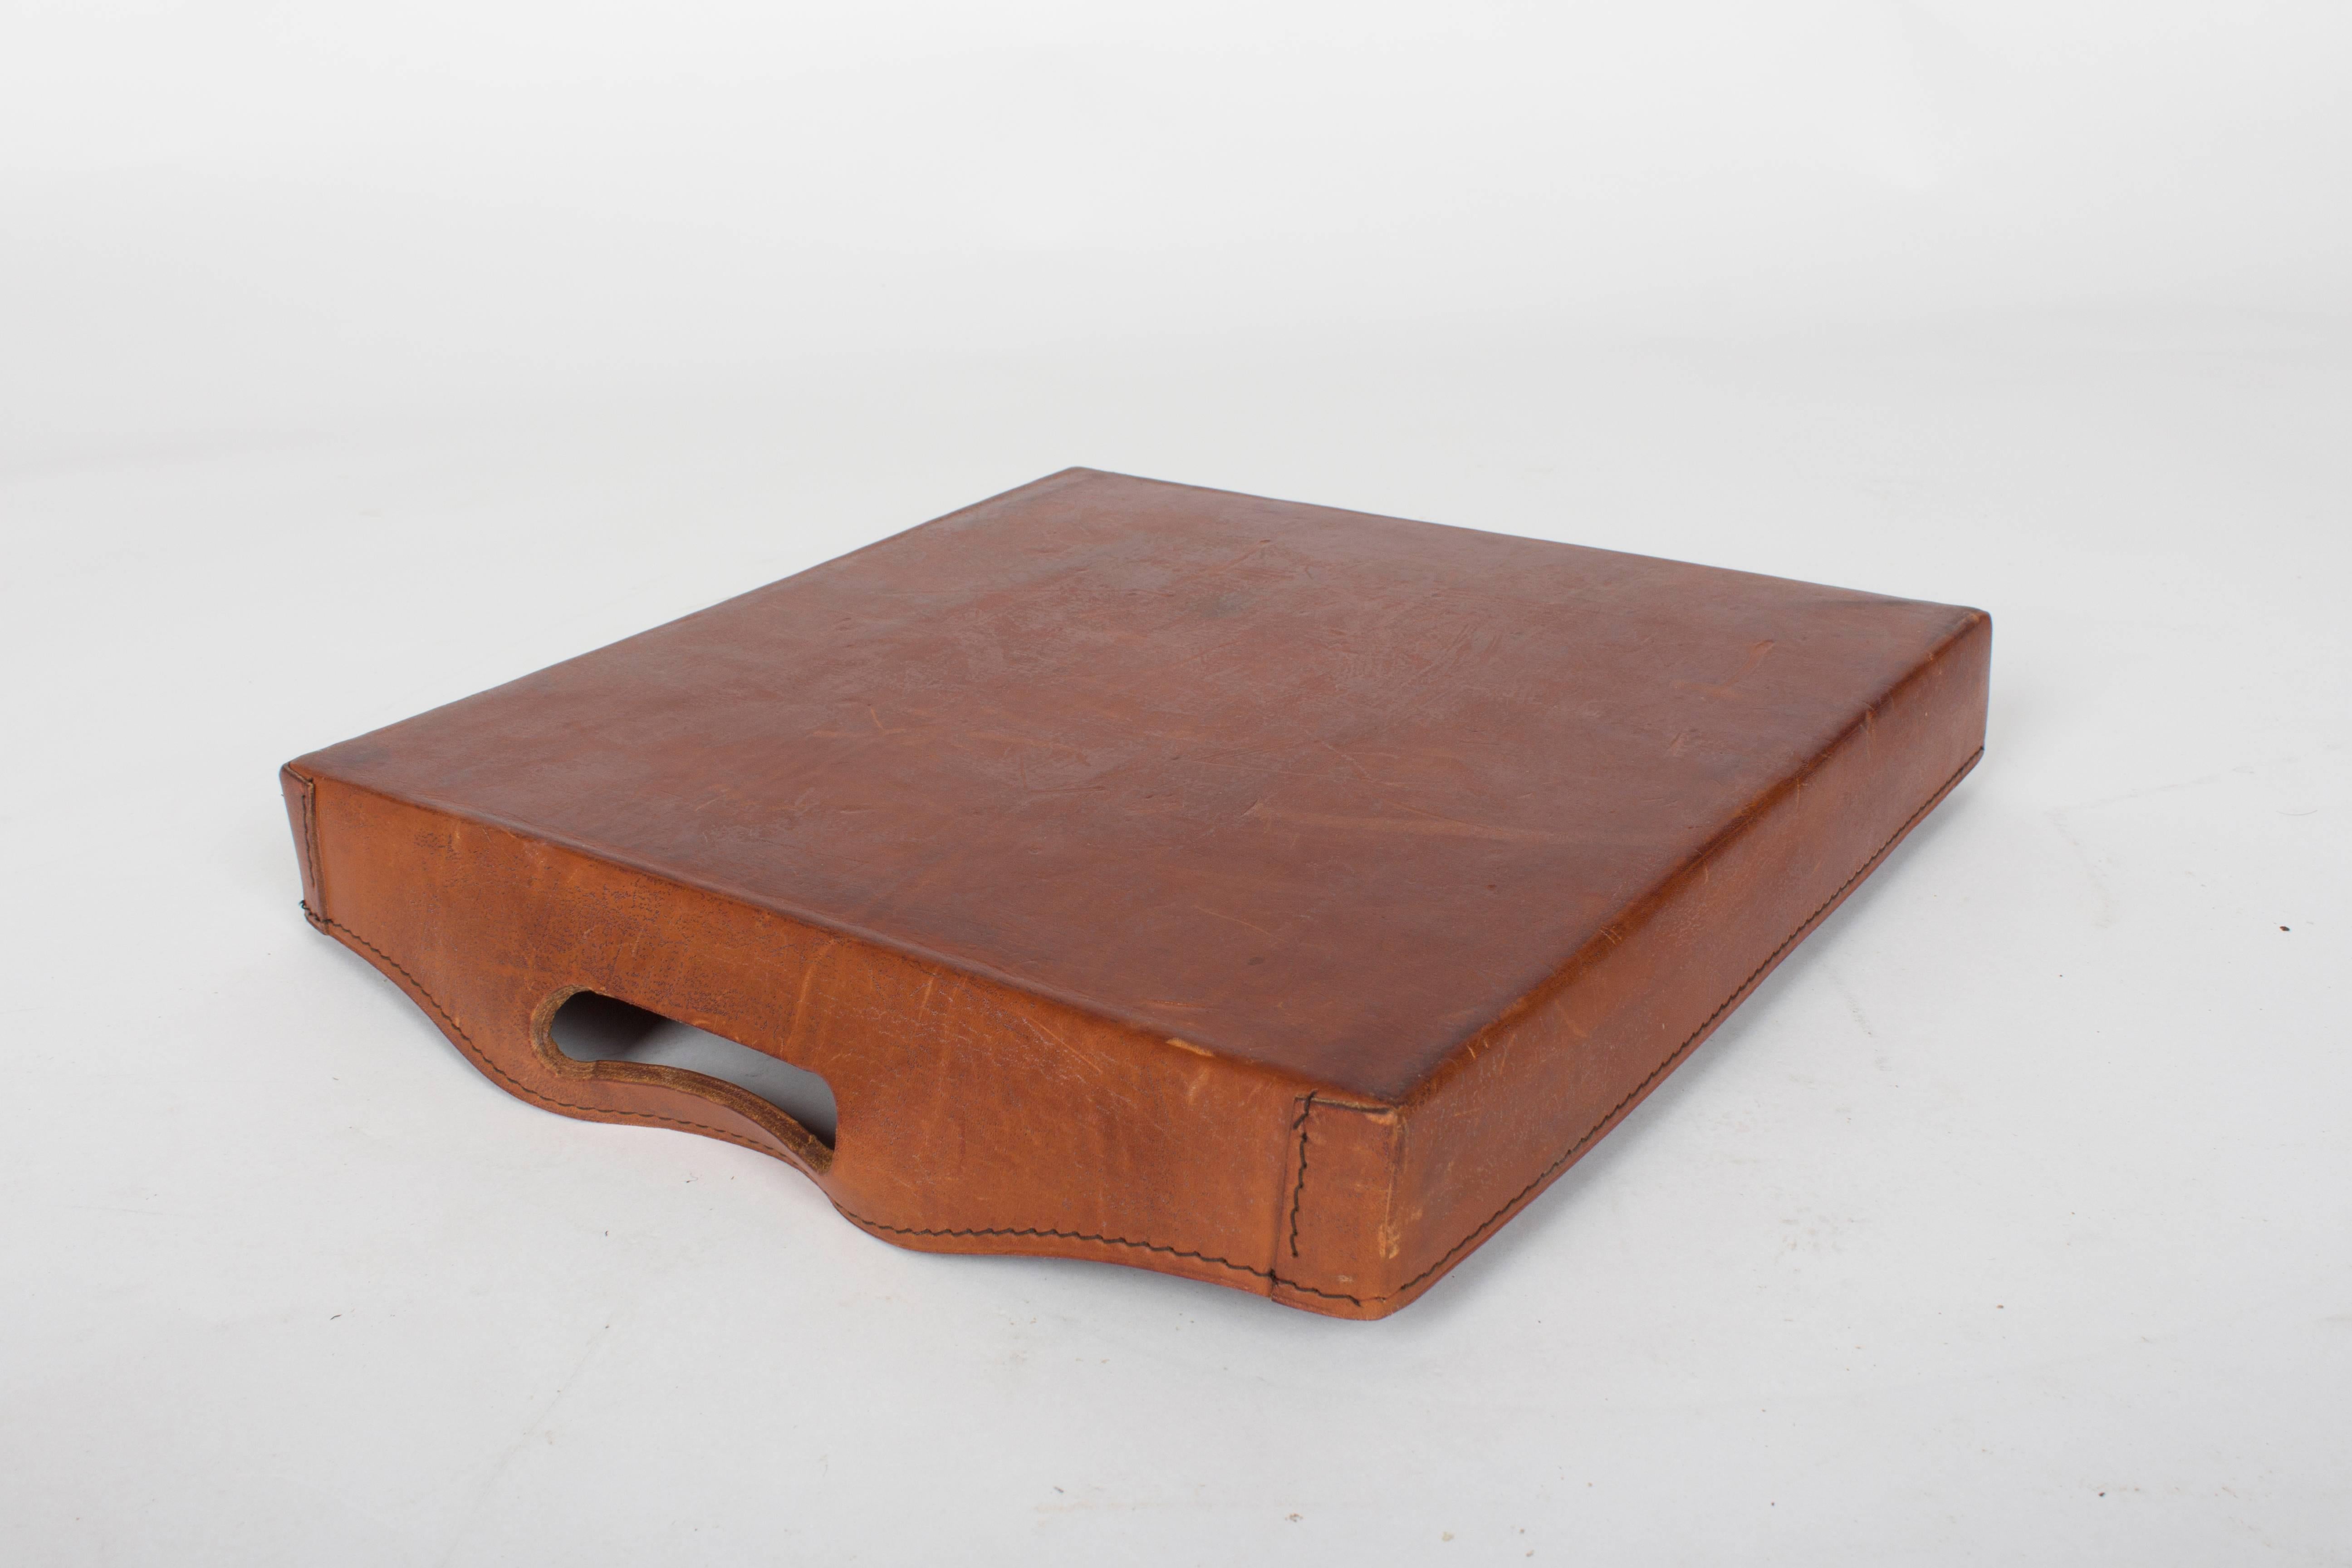 Rare Large and Thick Leather Serving Tray by the Auböck Workshop, Vienna, 1950s For Sale 5